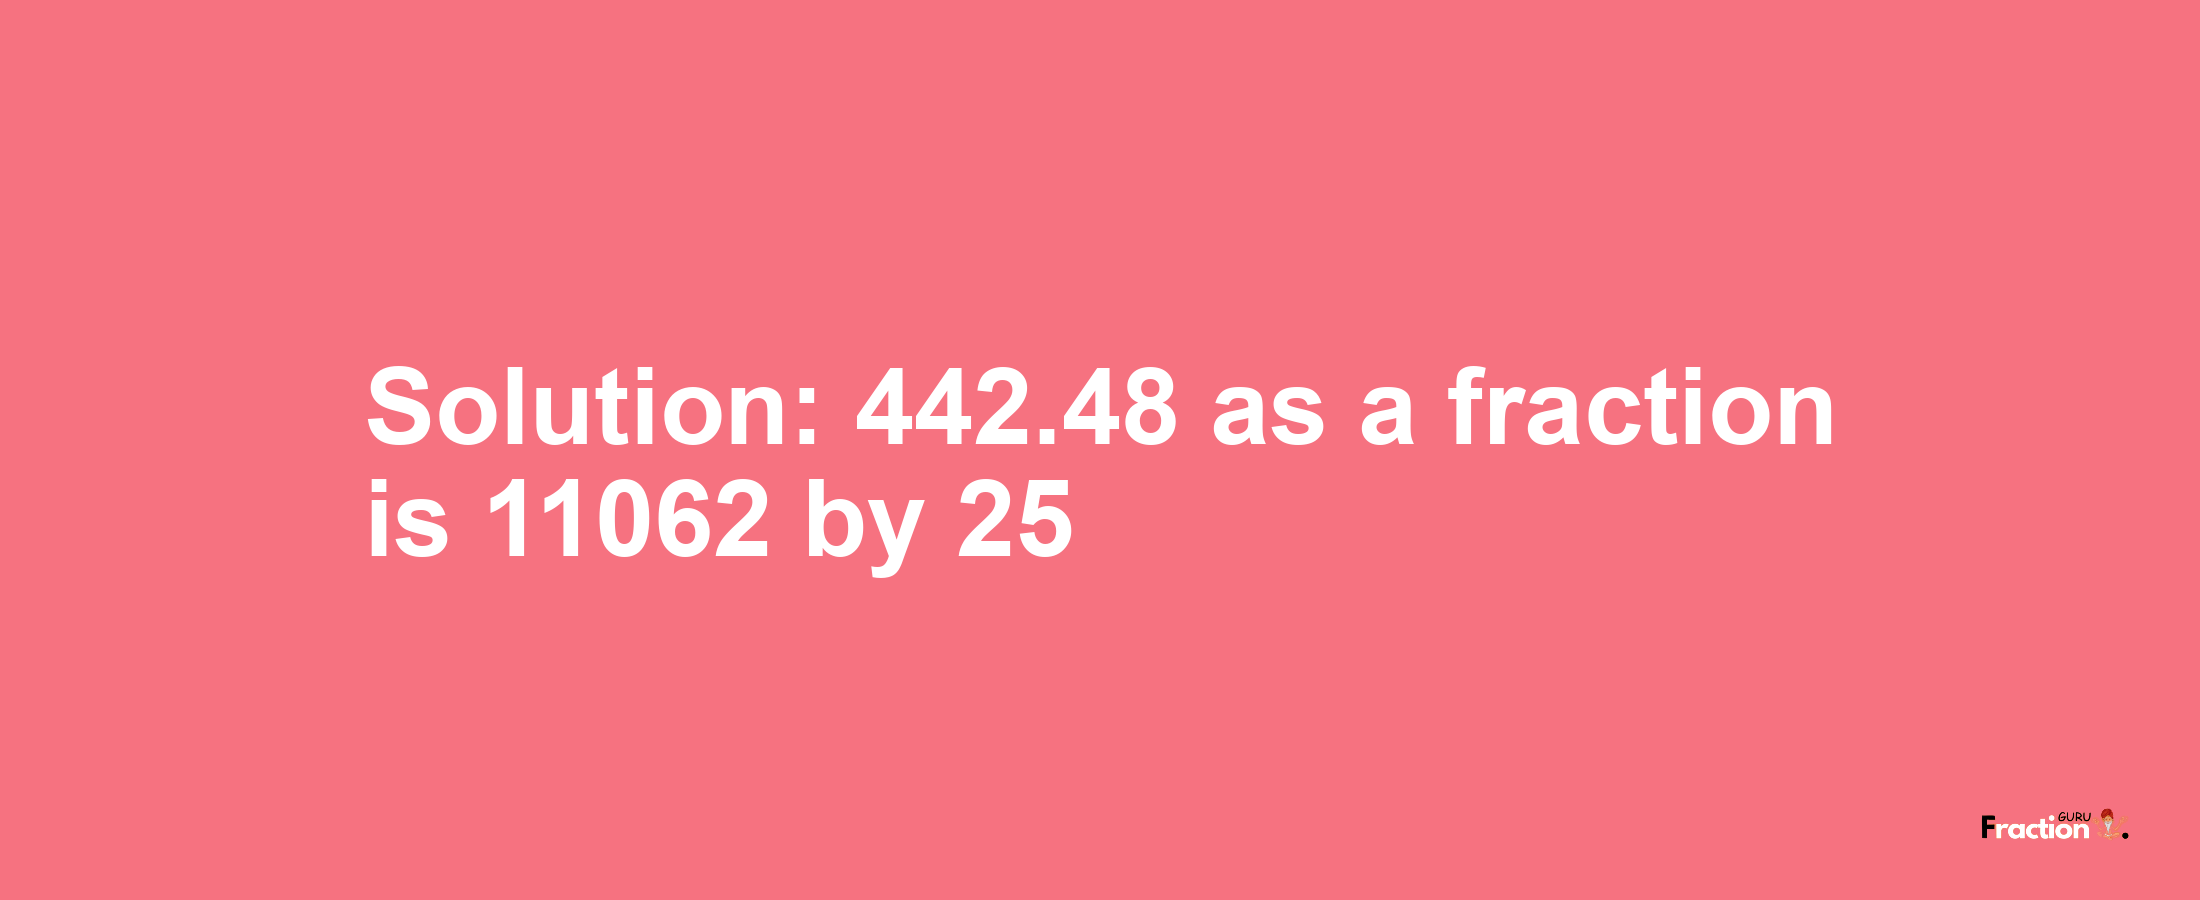 Solution:442.48 as a fraction is 11062/25